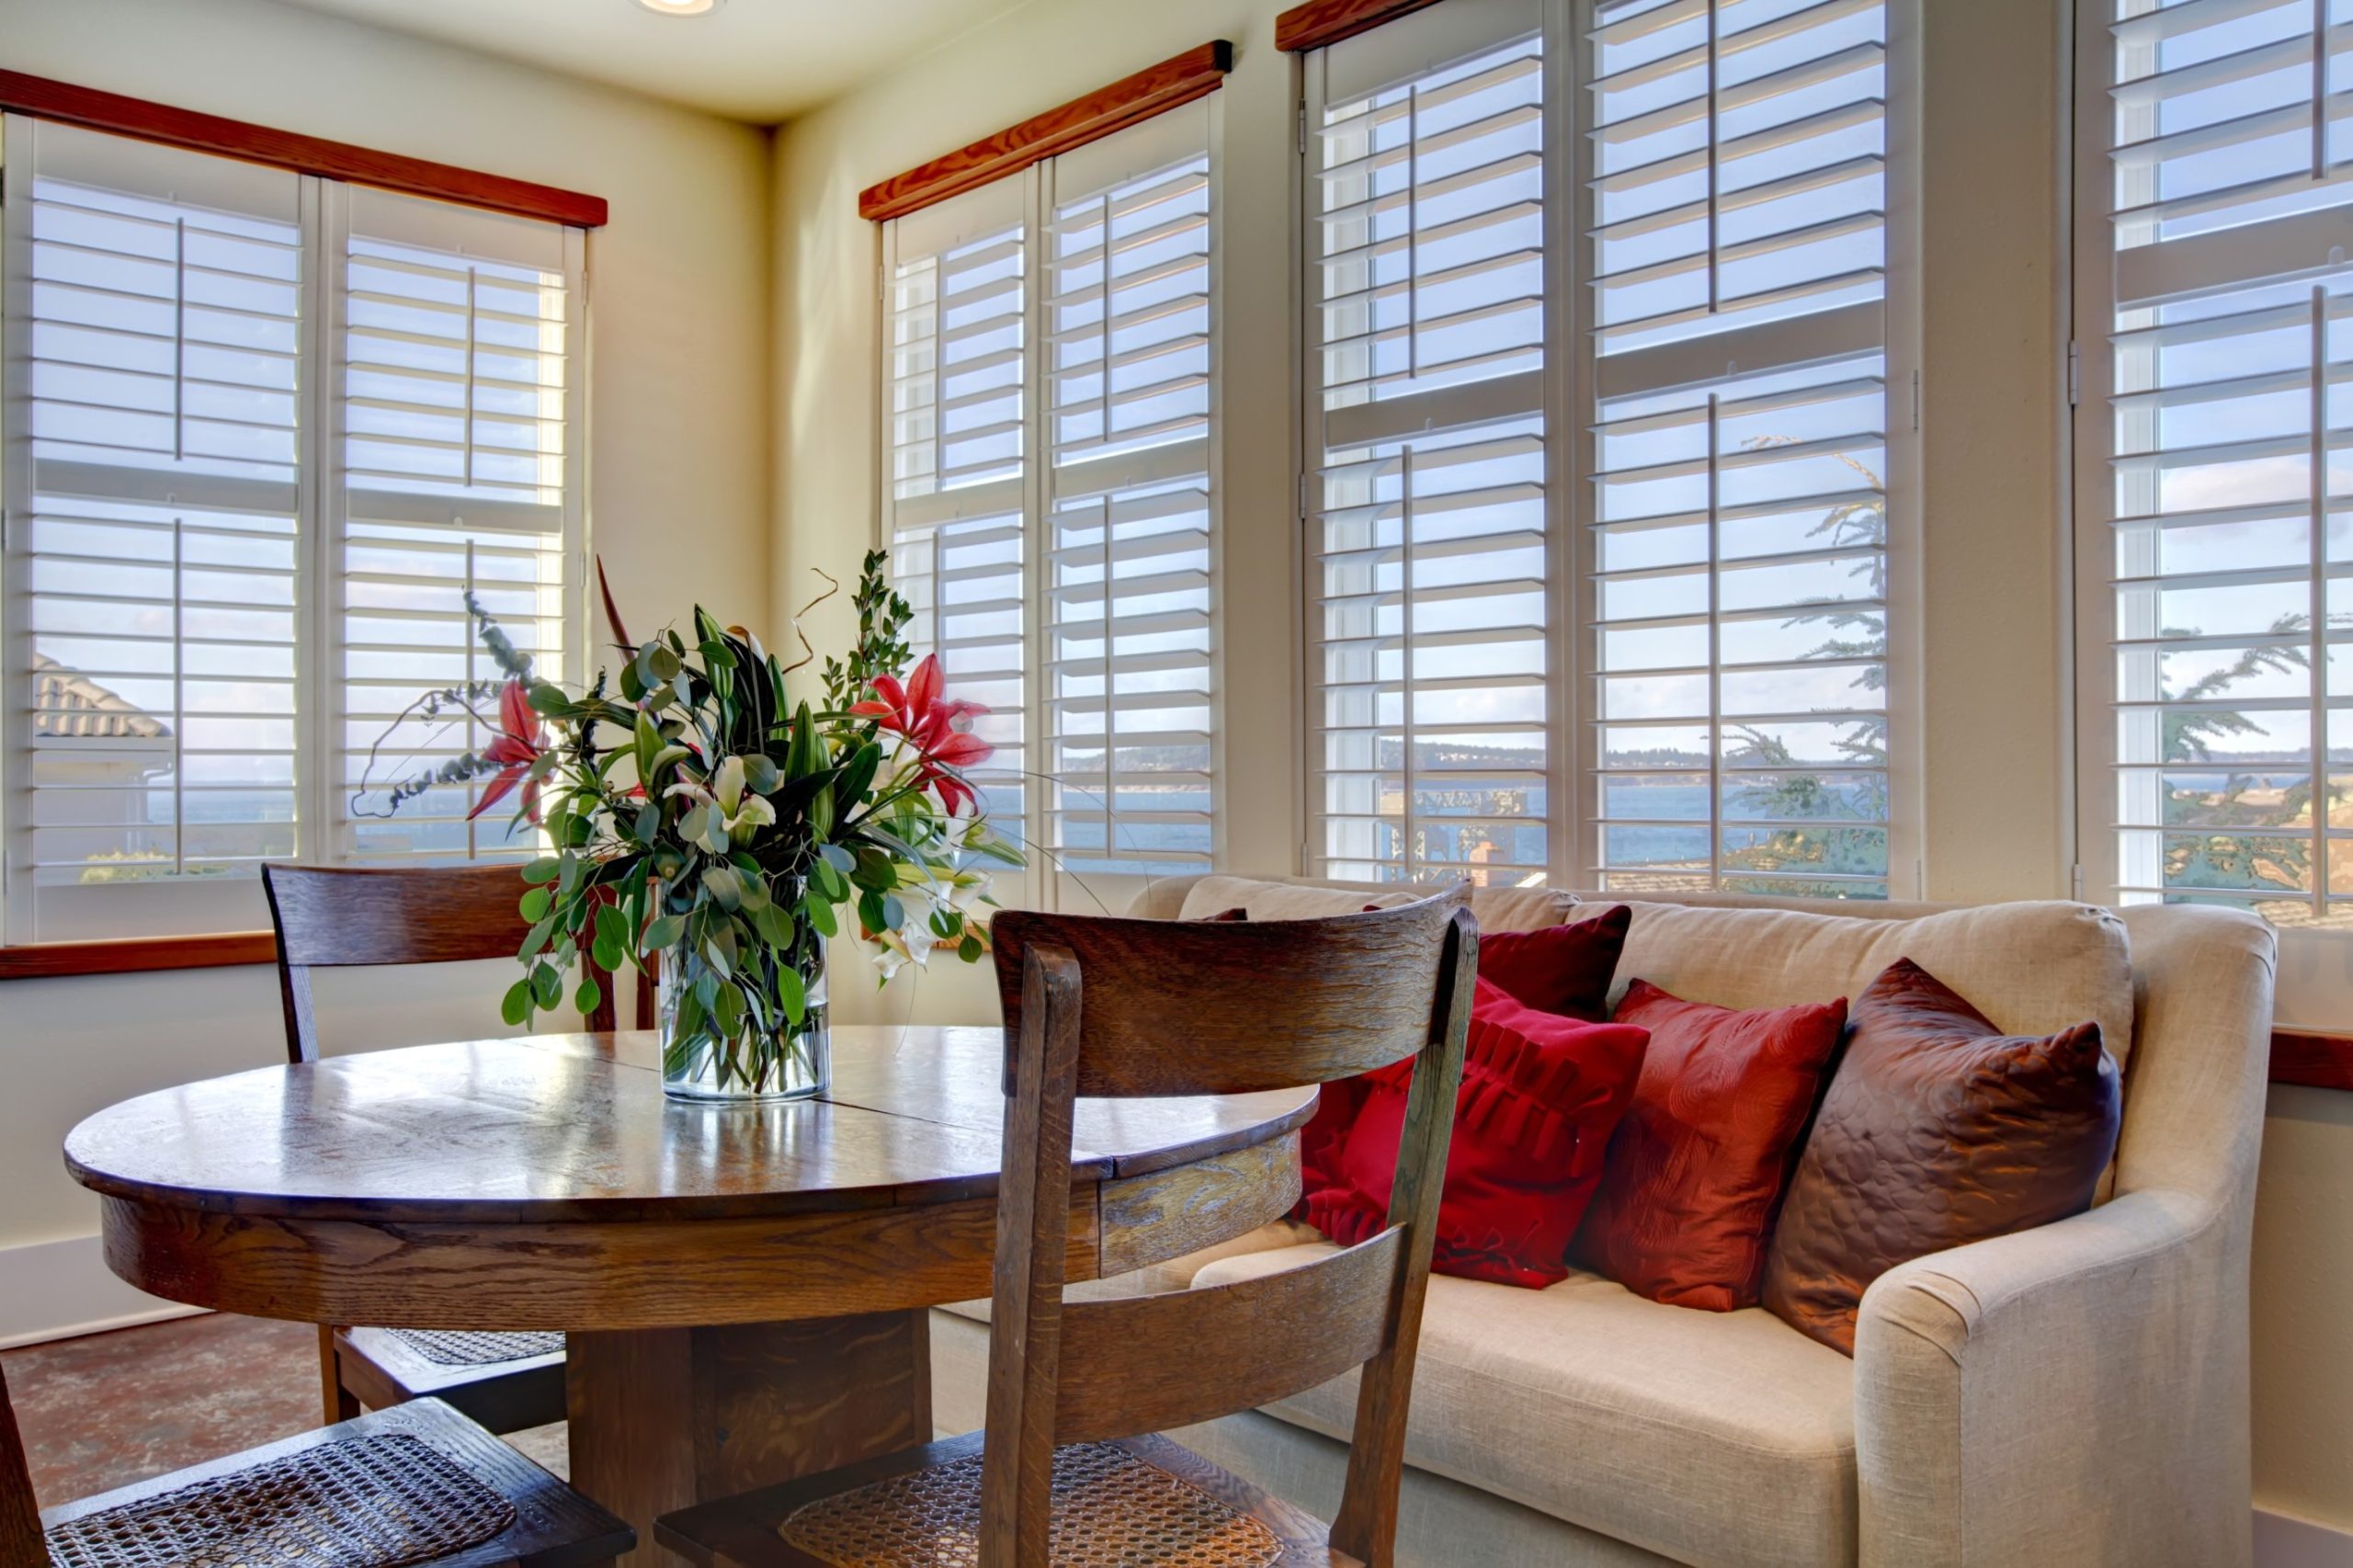 Wooden blinds can help spice up your décor